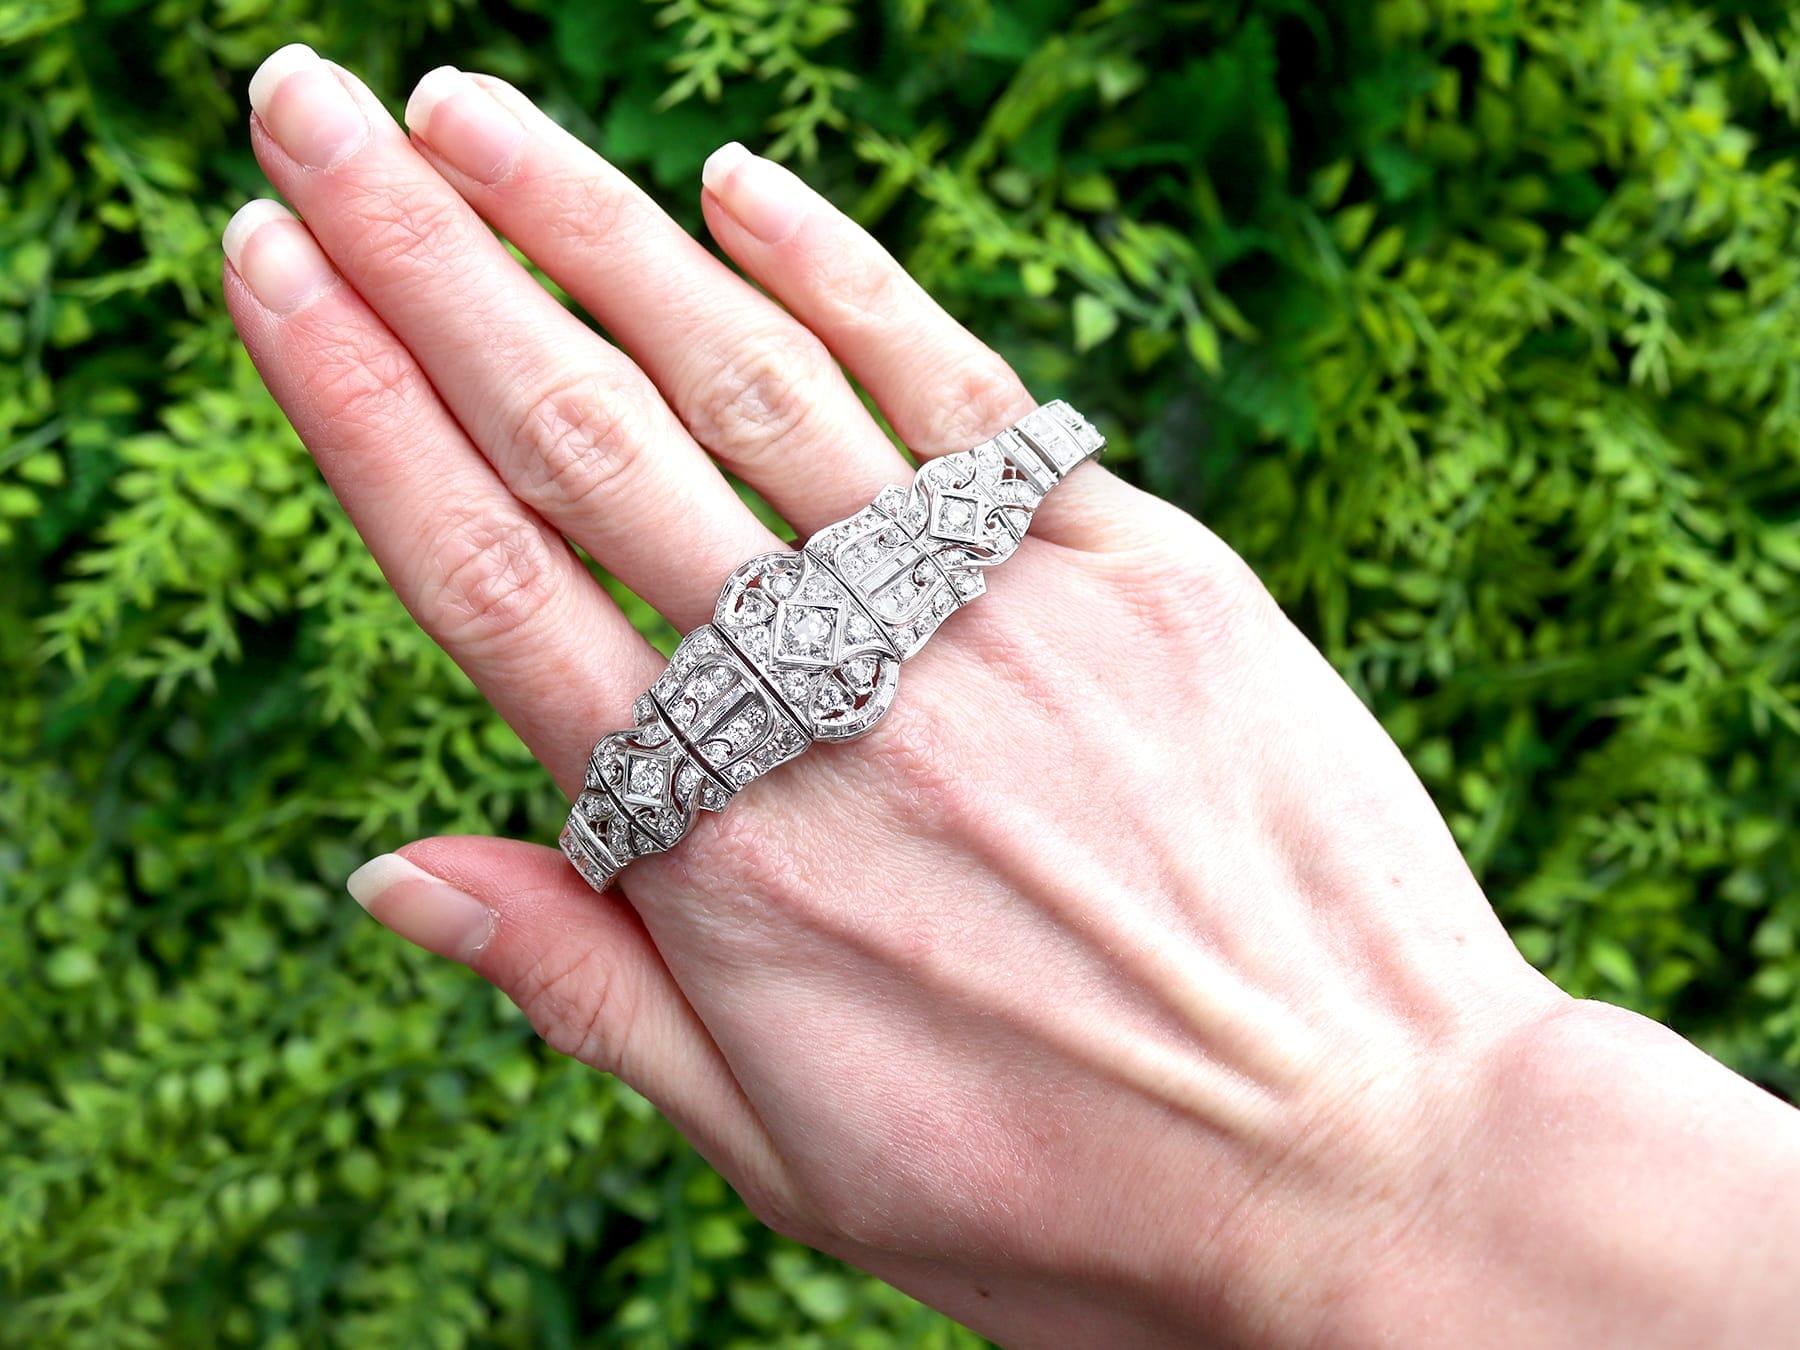 A stunning, fine and impressive antique 5.70 carat diamond and platinum bracelet; part of our diverse diamond jewellery and estate jewelry collections

This stunning, fine and impressive antique bracelet has been crafted in platinum.

The central